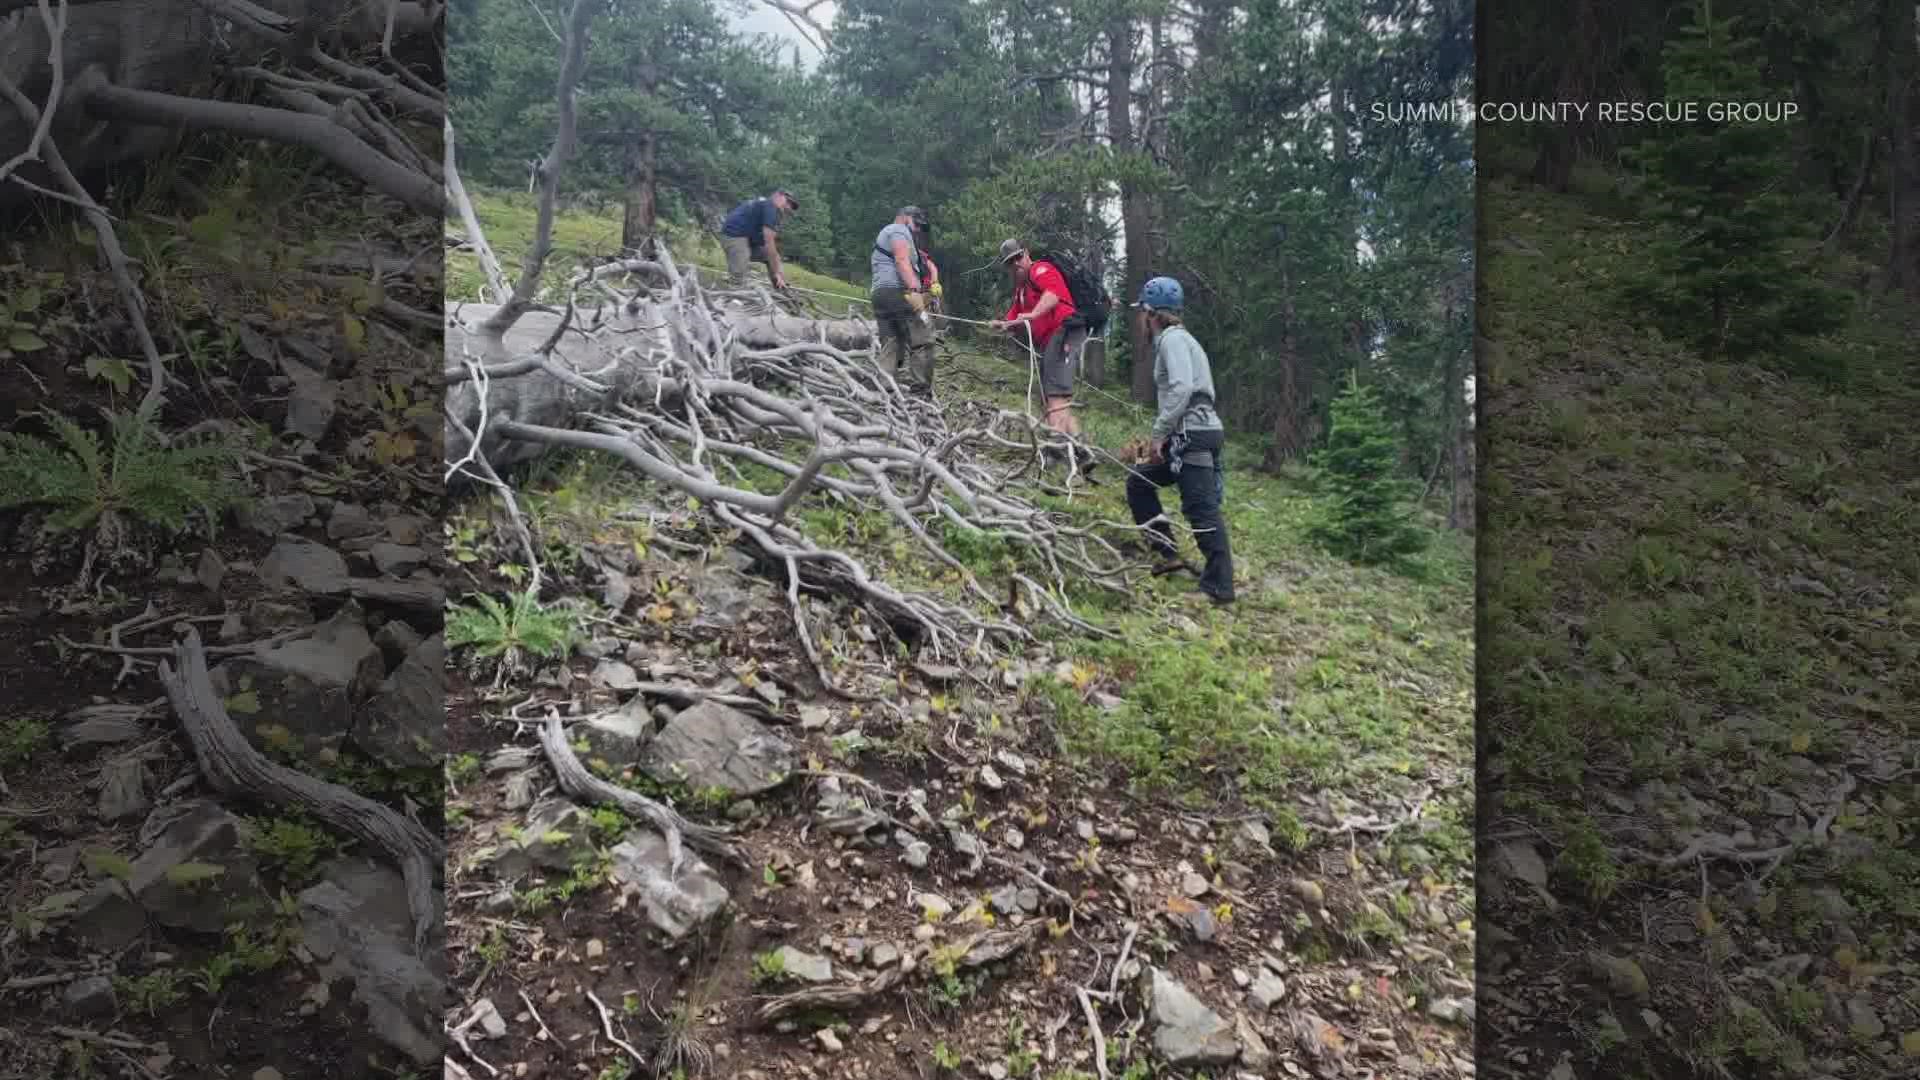 Summit County Rescue Group said the man crashed after launching from Peak 6 near Breckenridge Saturday.